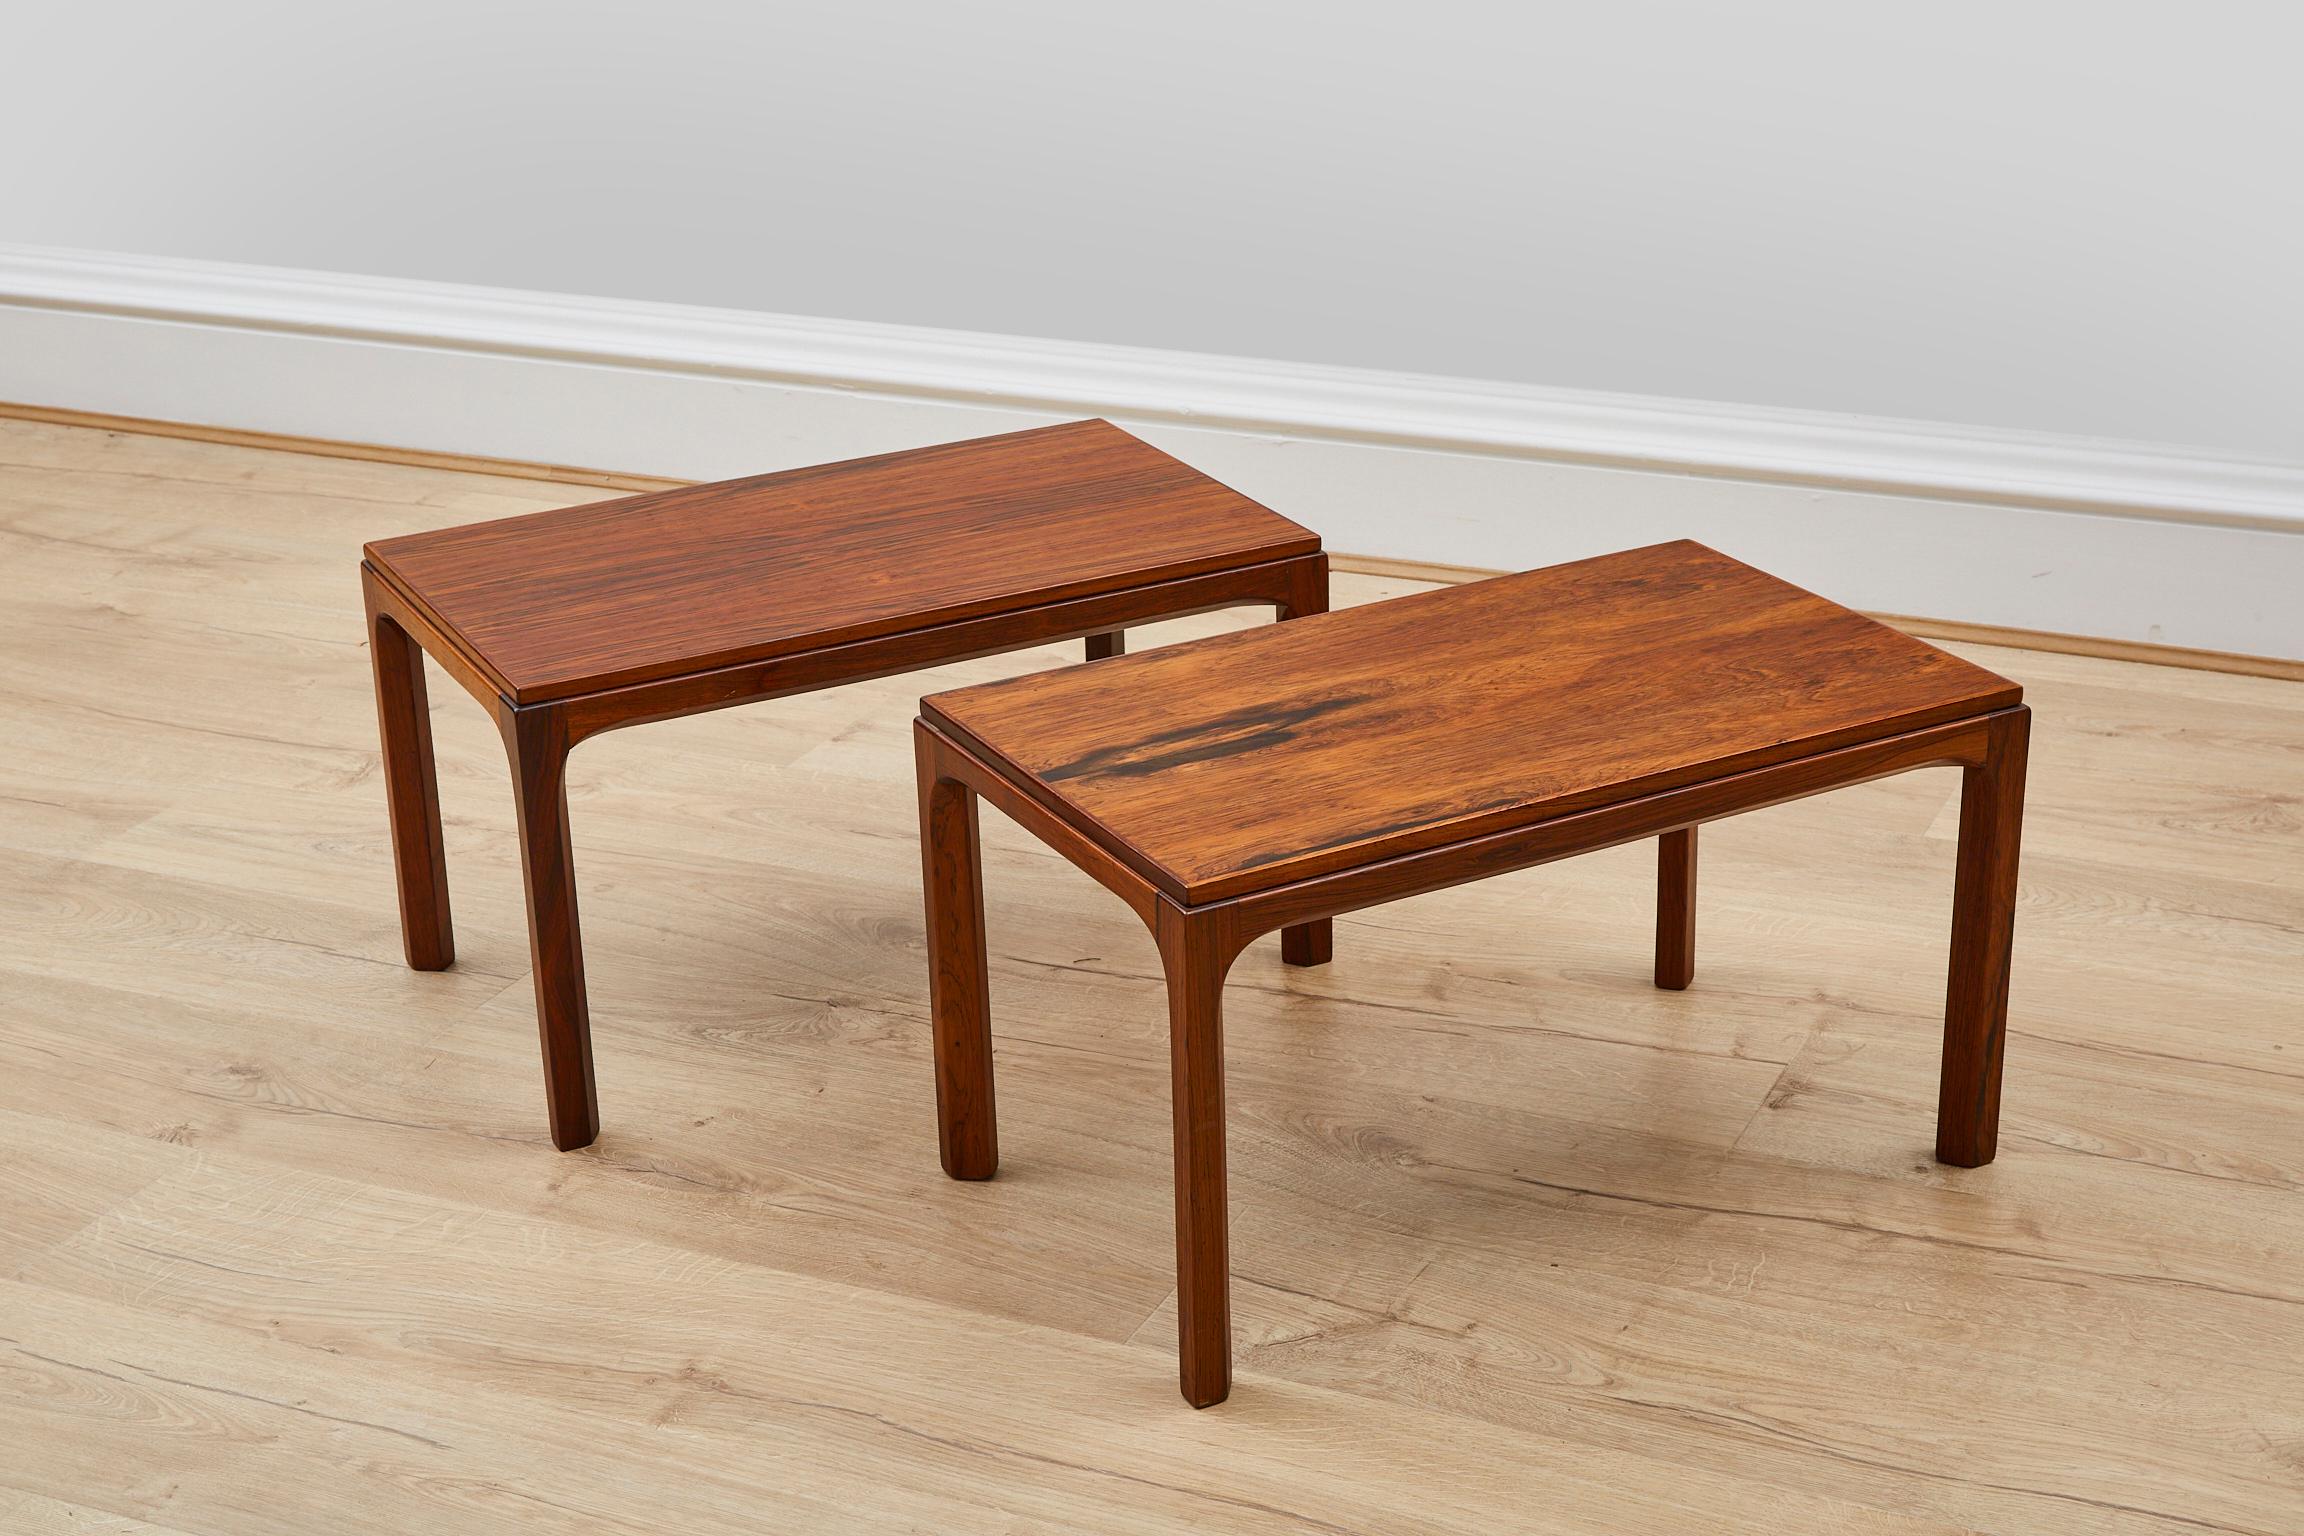 Set of 2 side tables, designed by Aksel Kjersgaard in rosewood for Odder Møbler. Model number 381.

Both a designer and a manufacturer, Aksel Kjersgaard created and produced furniture at the height of the Danish mid-century modern movement.

In